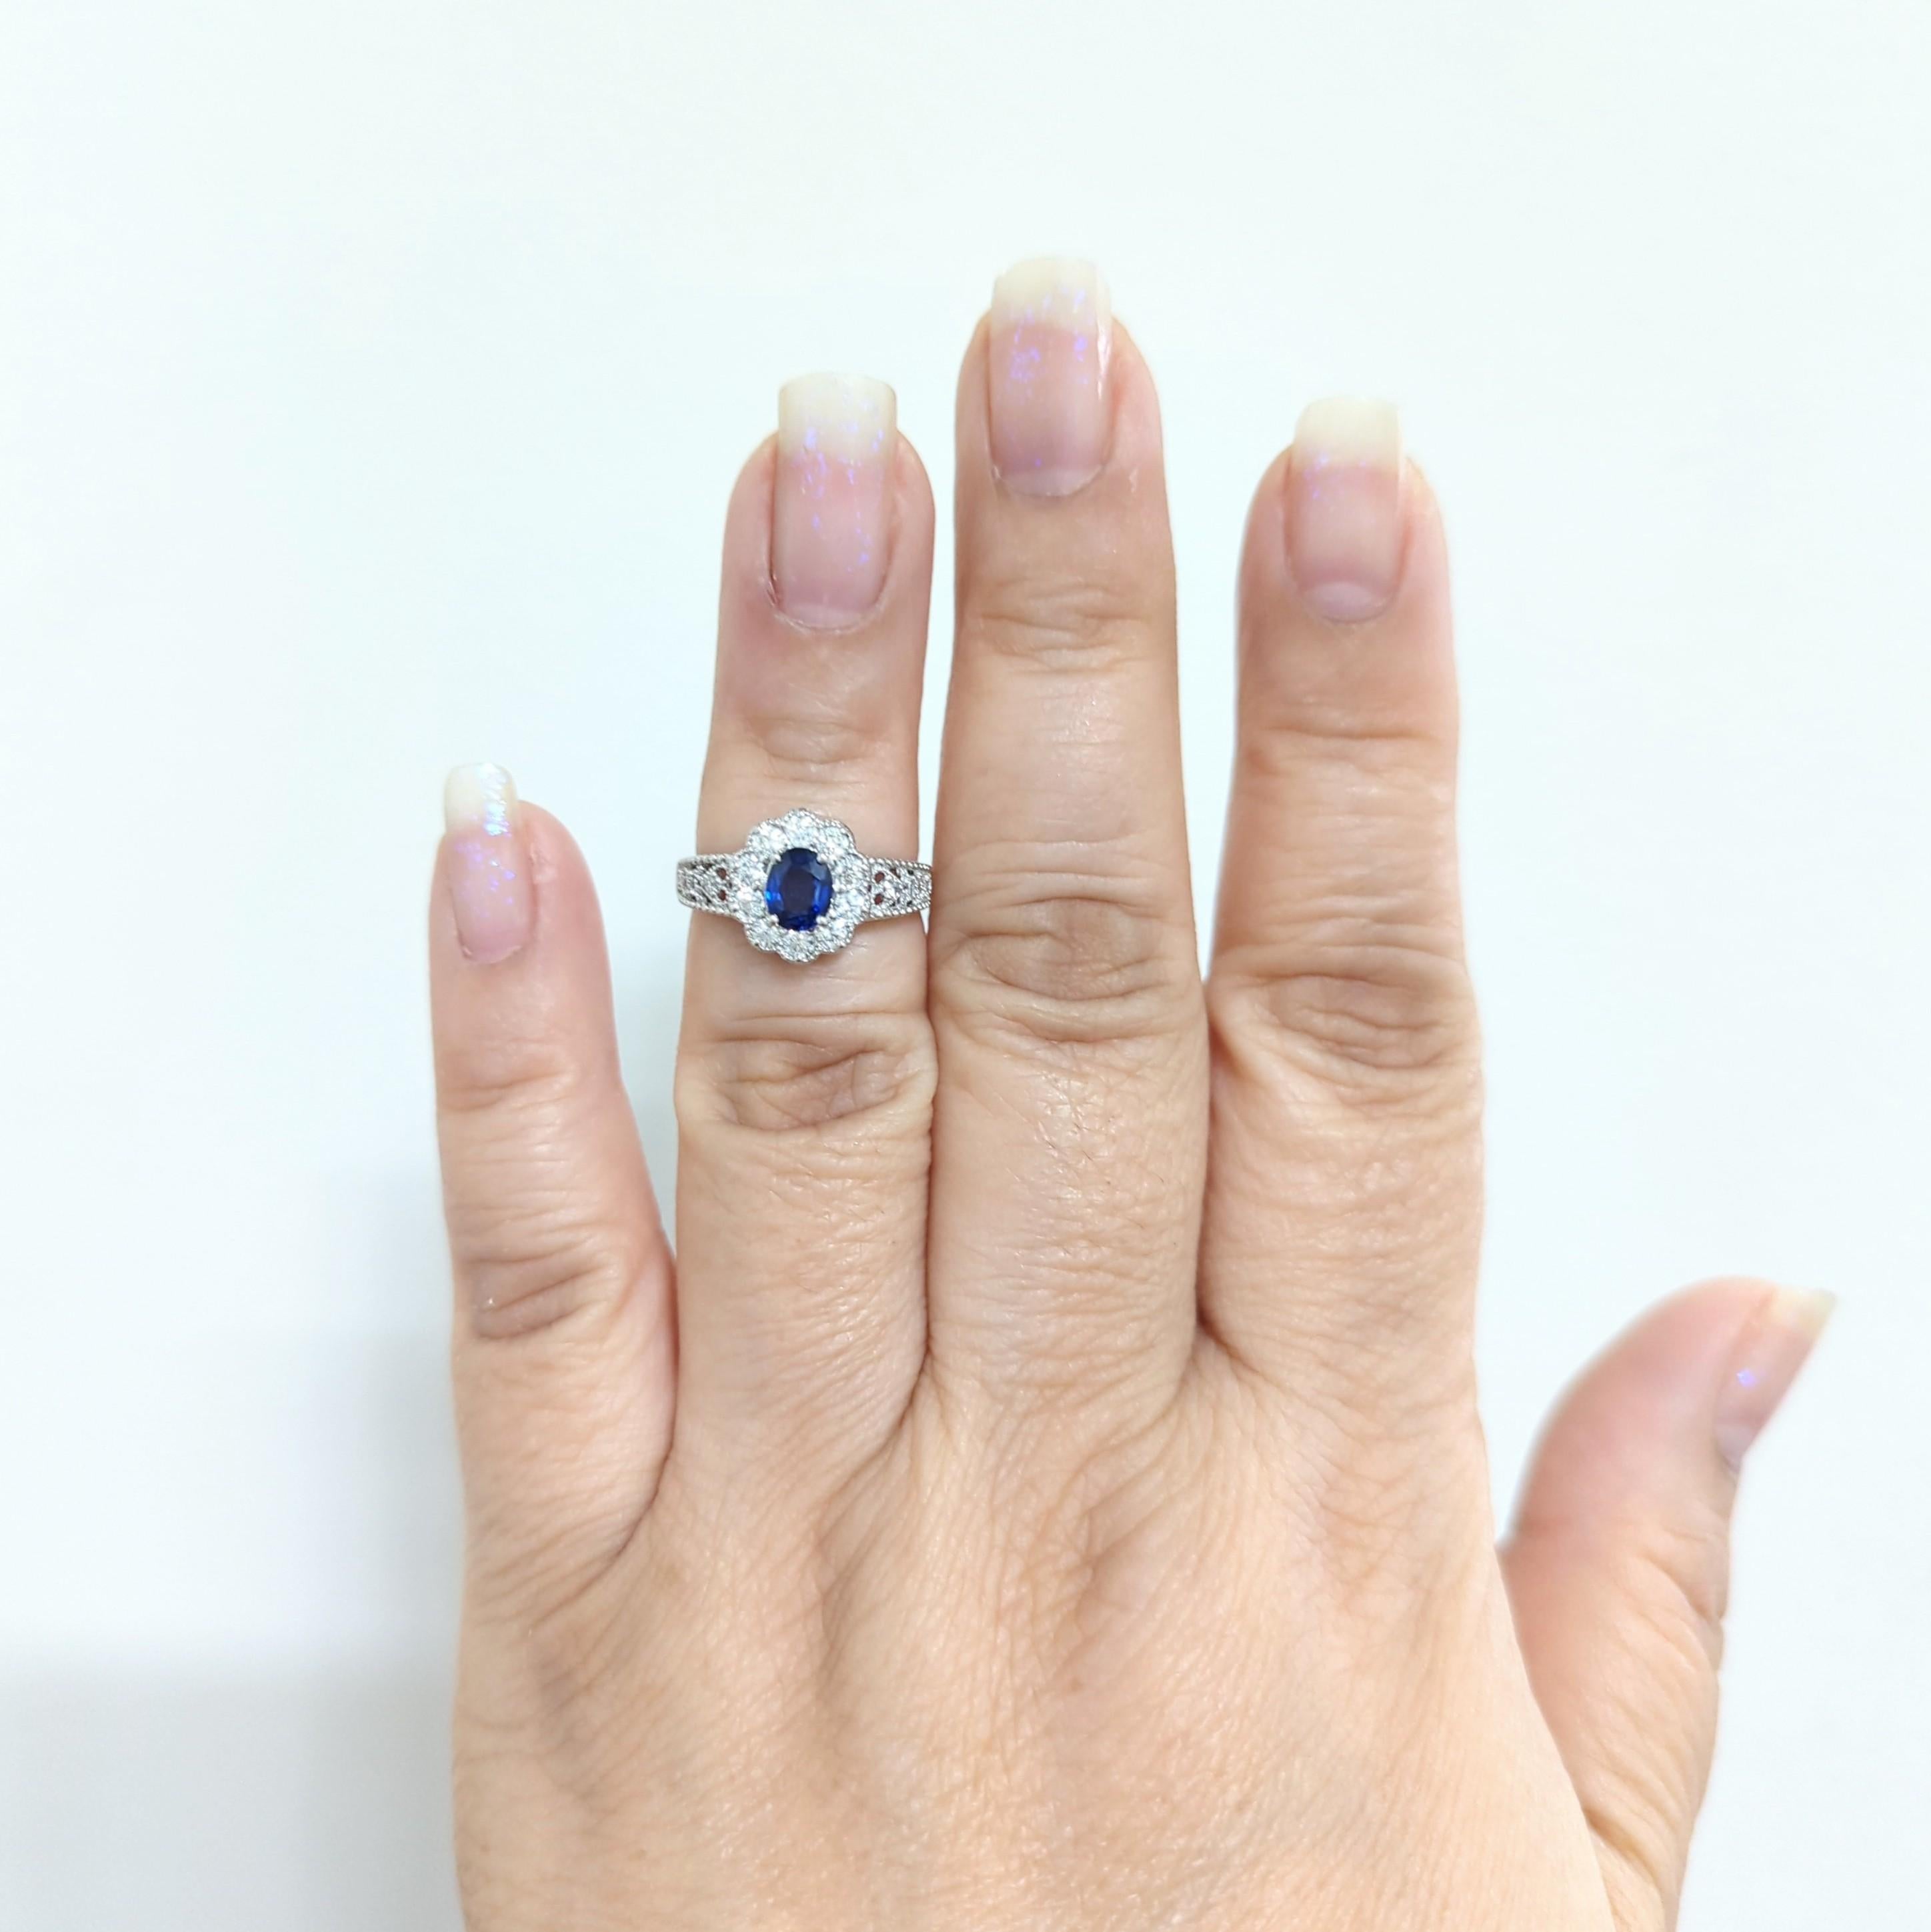 Beautiful deep blue sapphire oval weighing 0.80 ct. with 0.48 ct. of good quality white diamond rounds in a handmade platinum mounting.  Ring size is 5.75.  Estate piece in excellent condition.